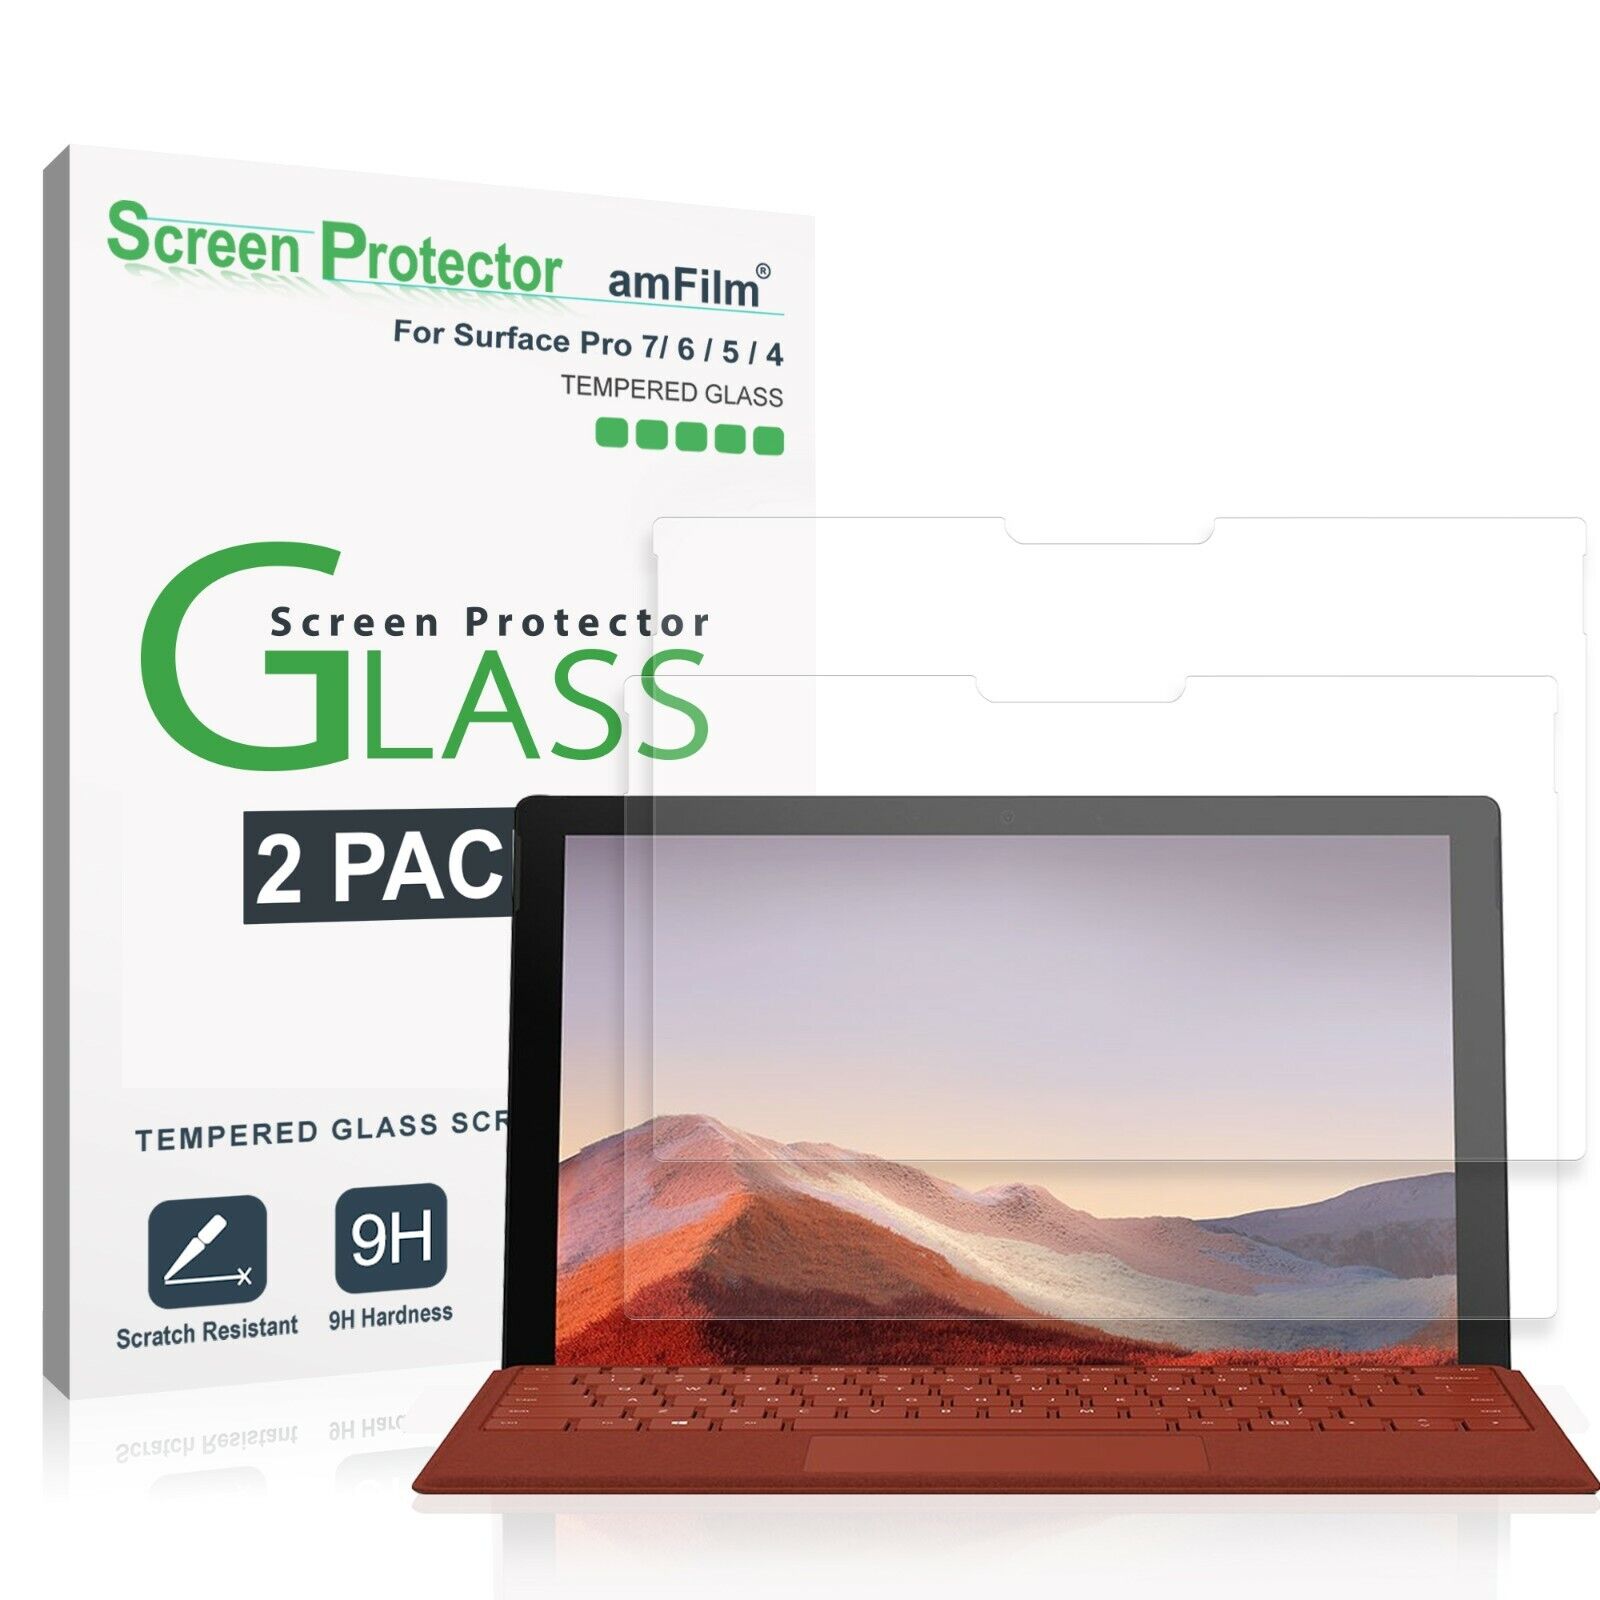 amFilm Microsoft Surface Pro 7/6/5/4 Tempered Glass Screen Protector (2 Pack)